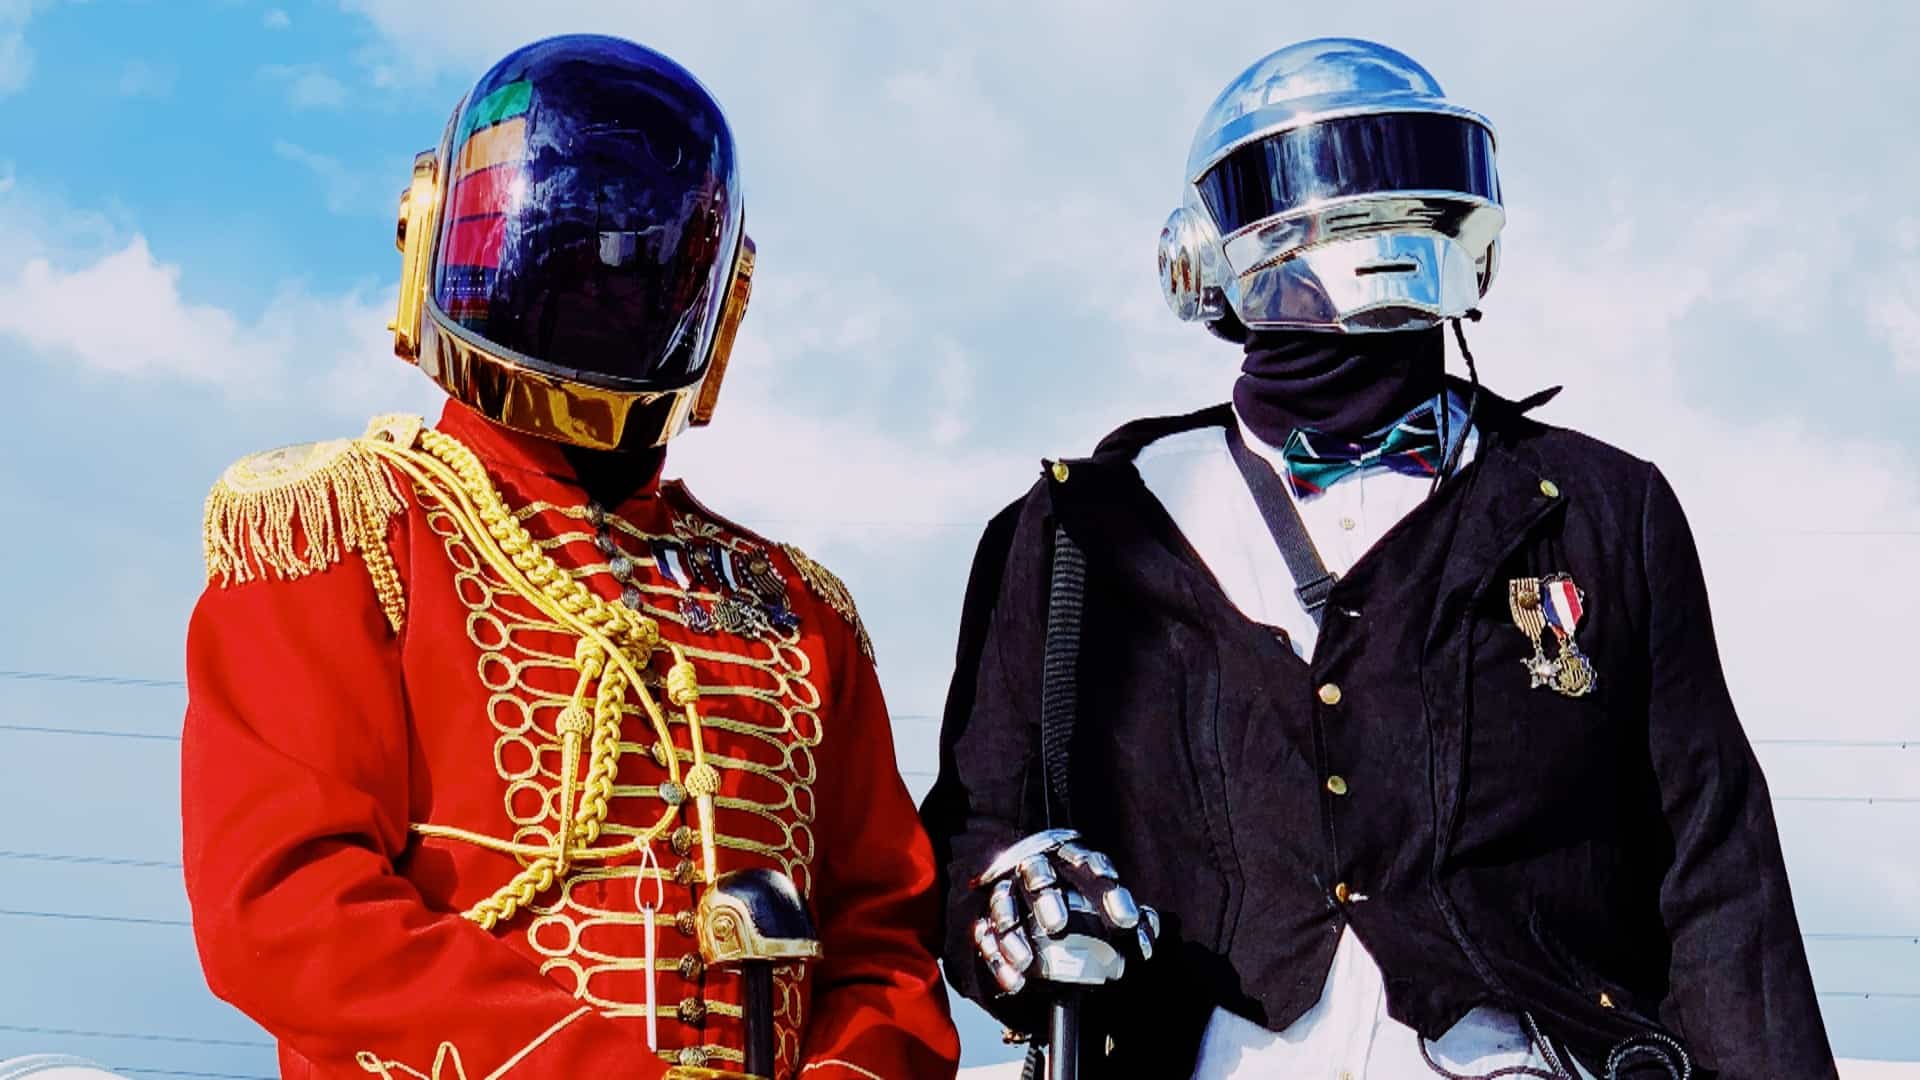 Daft Punk book ‘After Daft’ will feature over 60+ iconic artists and experts